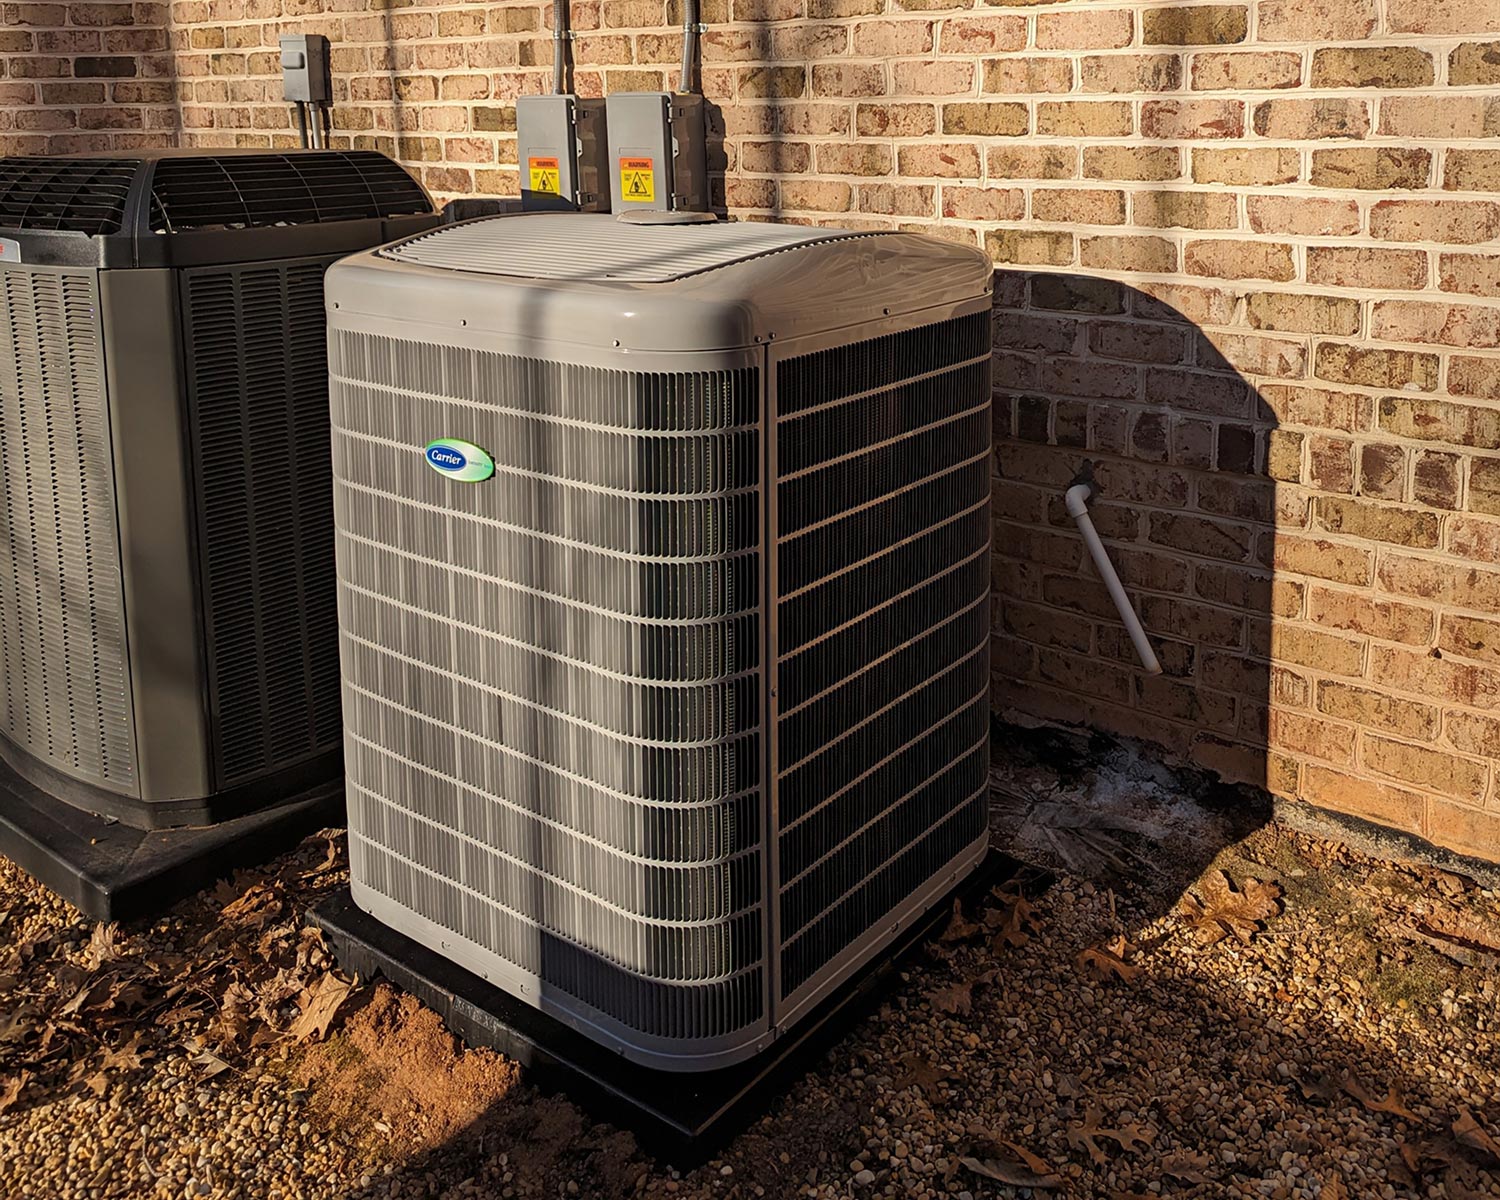 new Carrier HVAC residential system recently installed by Zone in the Atlanta area